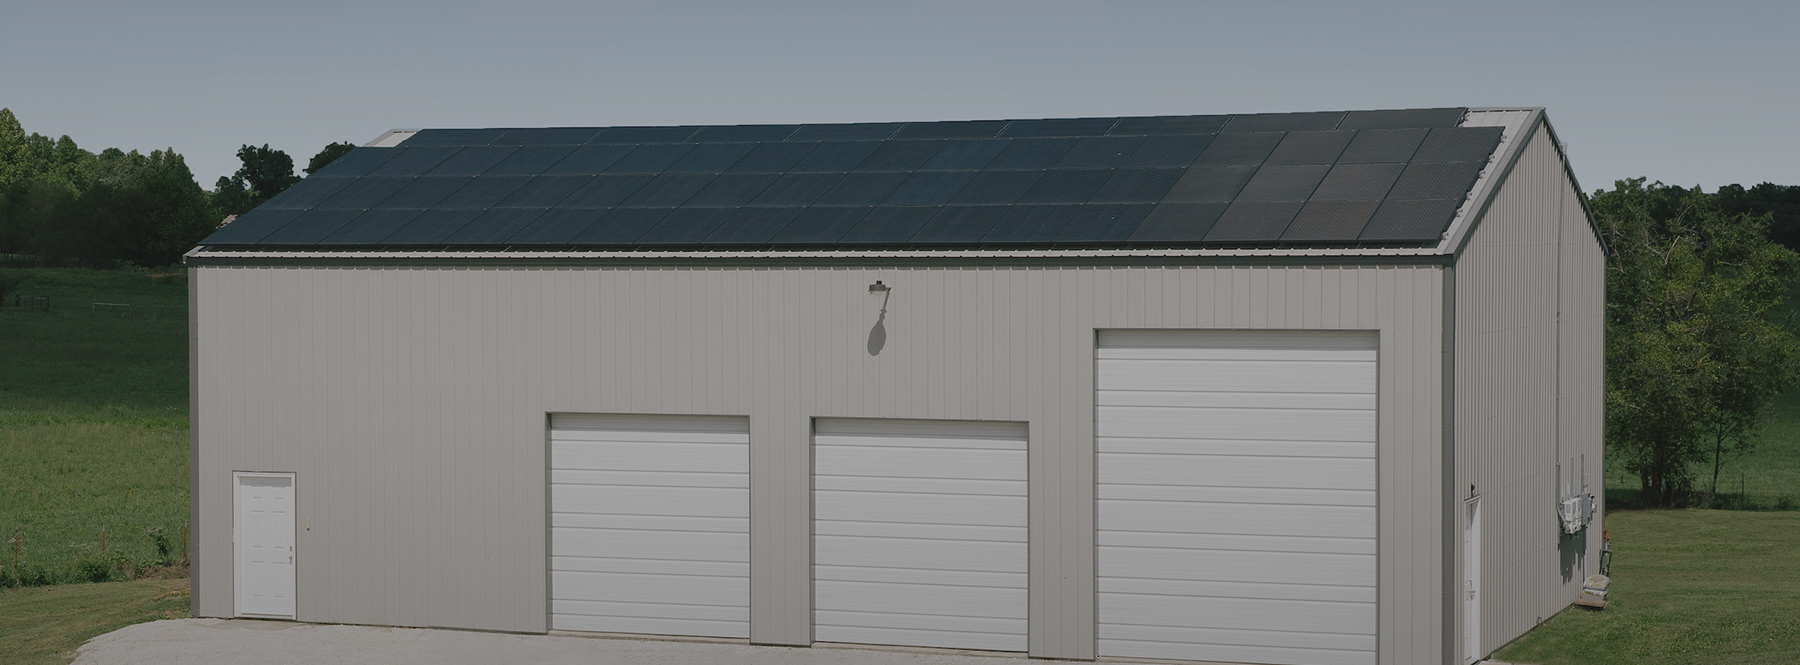 Grey, aluminum building with 3 white garage doors and roof-mounted solar panels.